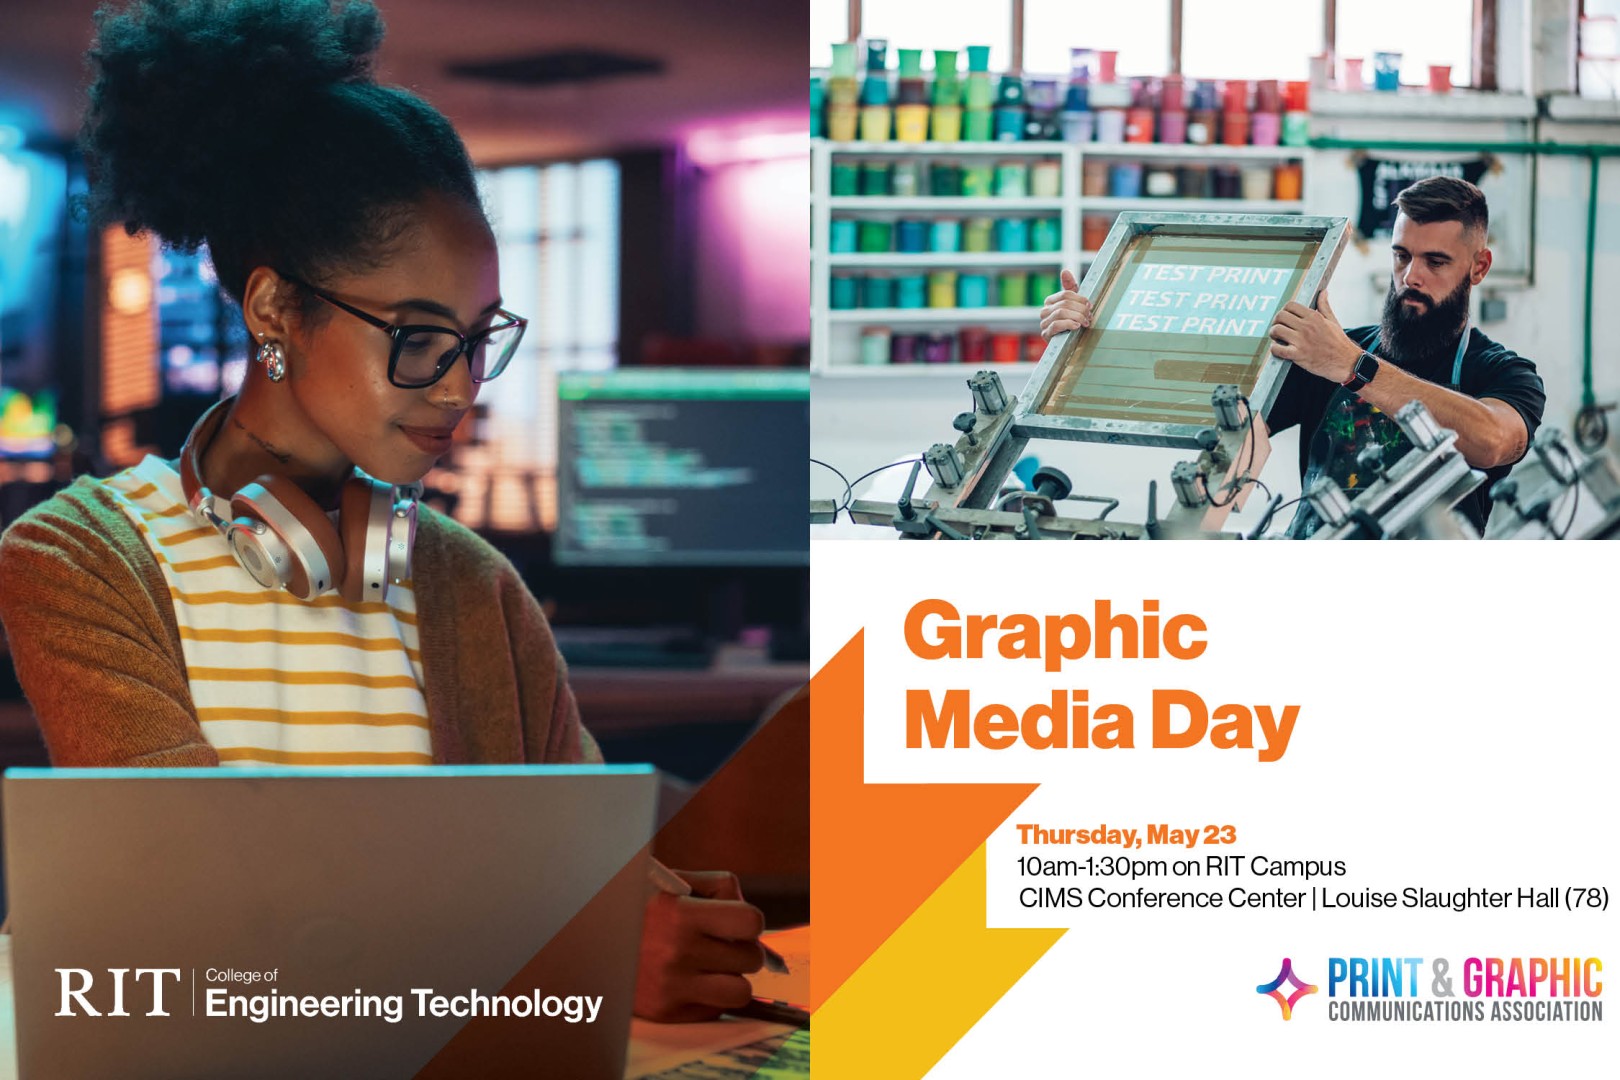 graphic media day event on RIT campus for prospective students